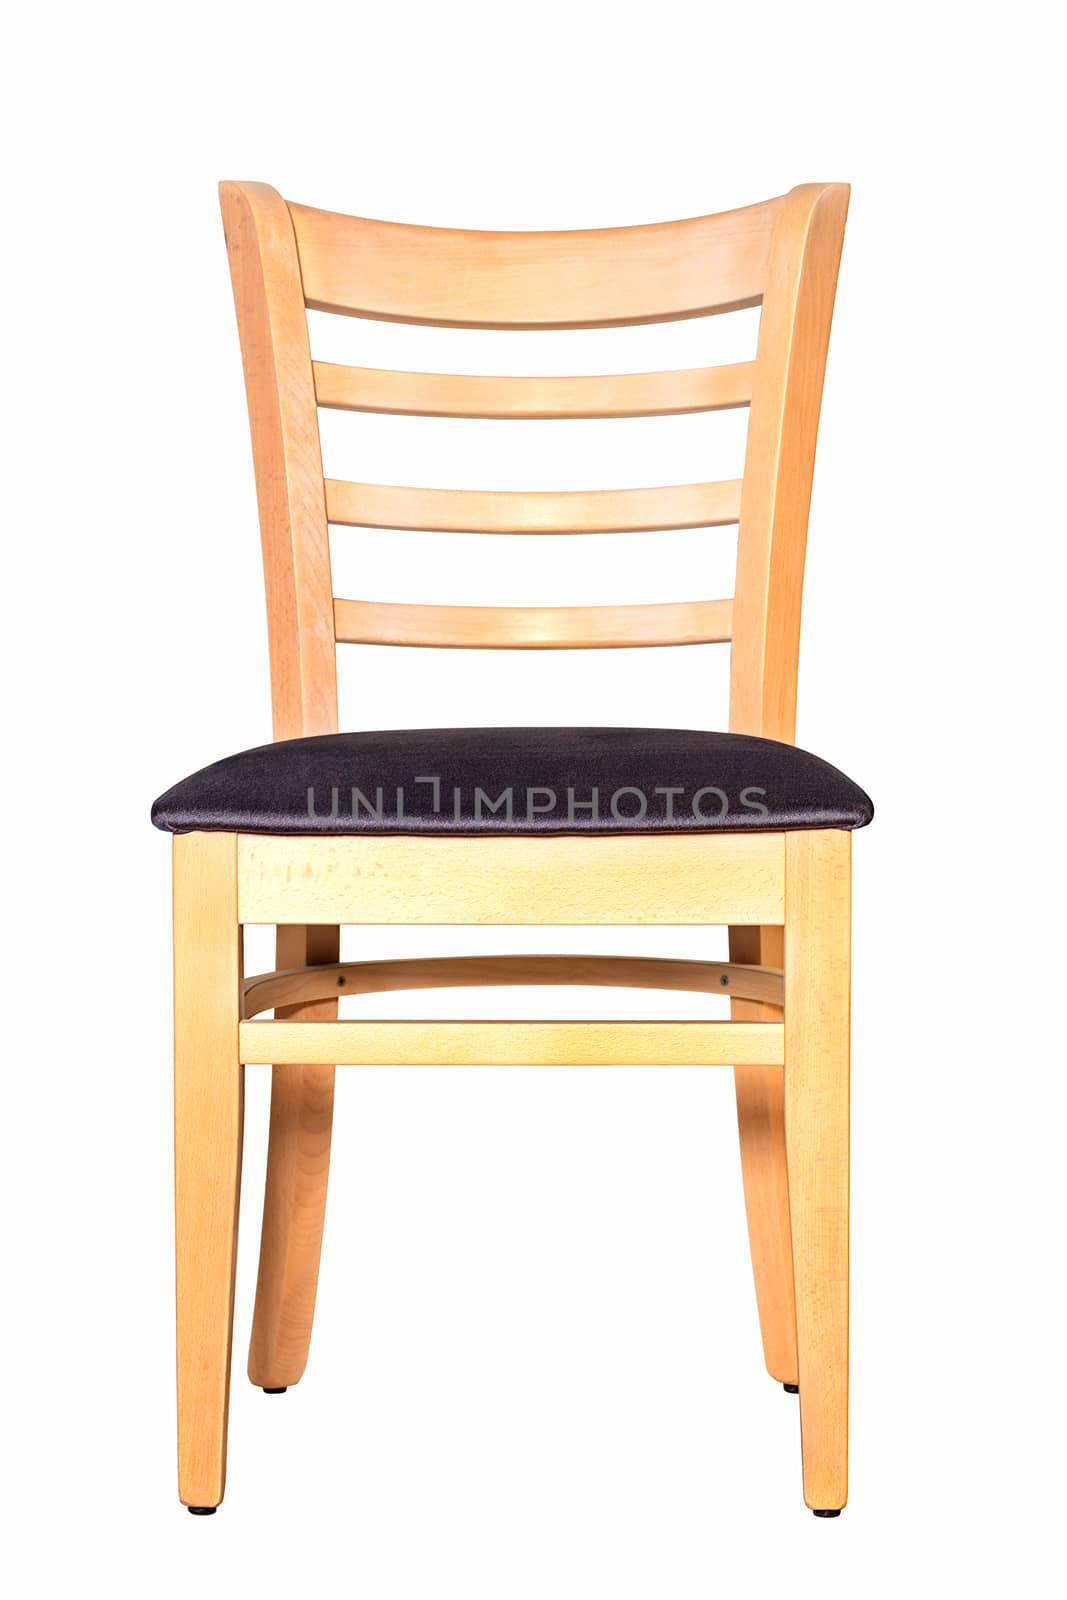 Wooden classic chair with soft brown upholstery, photographed frontally, isolated on a white background.